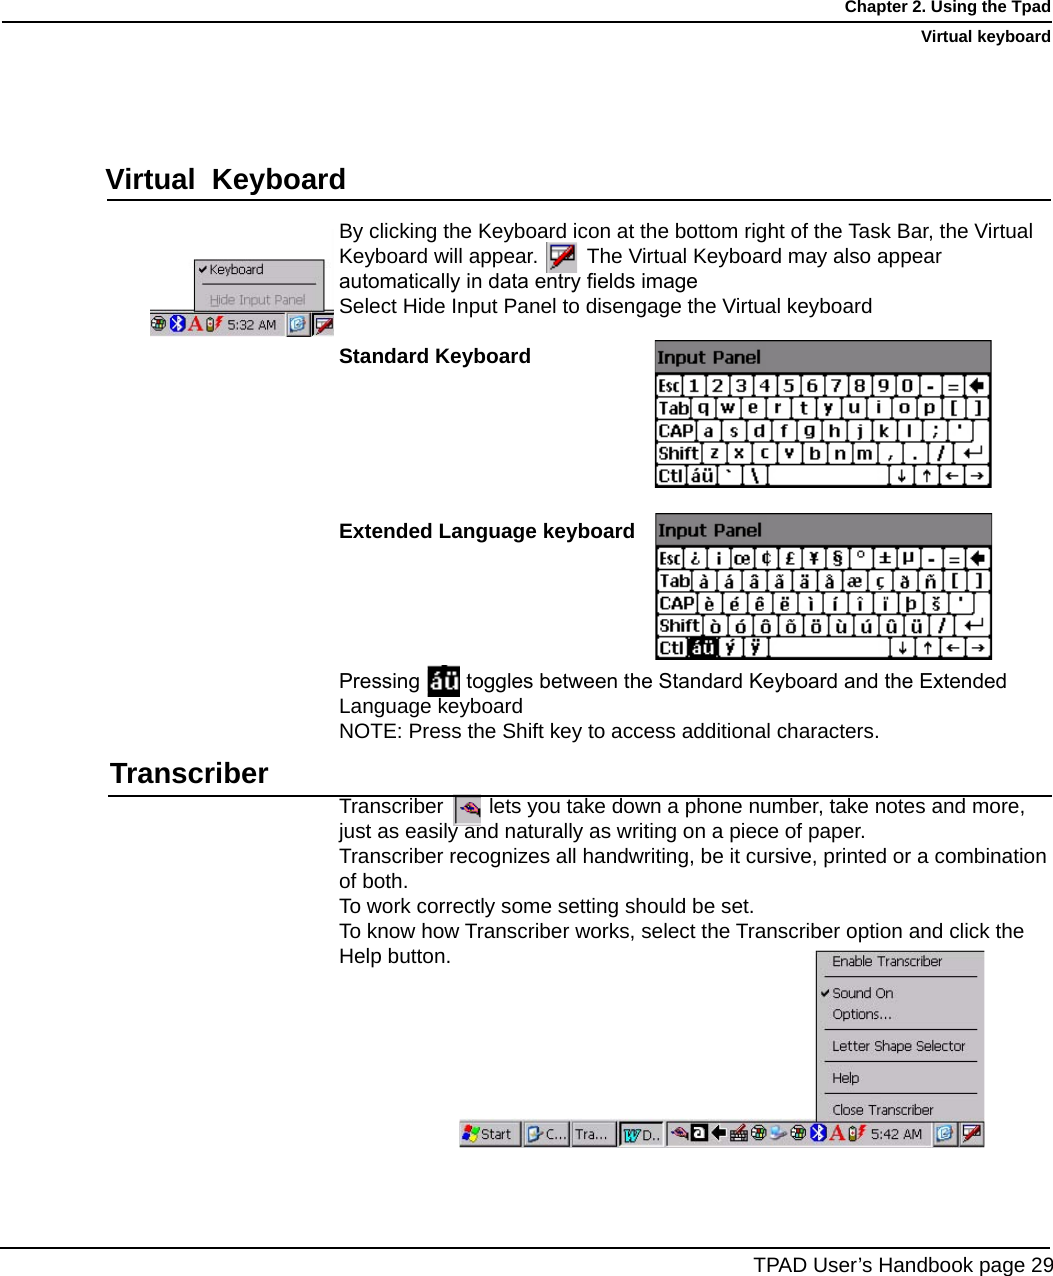 By clicking the Keyboard icon at the bottom right of the Task Bar, the VirtualKeyboard will appear.       The Virtual Keyboard may also appear automatically in data entry elds imageSelect Hide Input Panel to disengage the Virtual keyboardStandard KeyboardExtended Language keyboardPressing        toggles between the Standard Keyboard and the Extended Language keyboardNOTE: Press the Shift key to access additional characters.Transcriber   lets you take down a phone number, take notes and more, just as easily and naturally as writing on a piece of paper. Transcriber recognizes all handwriting, be it cursive, printed or a combination of both.To work correctly some setting should be set.To know how Transcriber works, select the Transcriber option and click theHelp button.TPAD User’s Handbook page 29Chapter 2. Using the TpadVirtual keyboardVirtual  KeyboardTranscriber